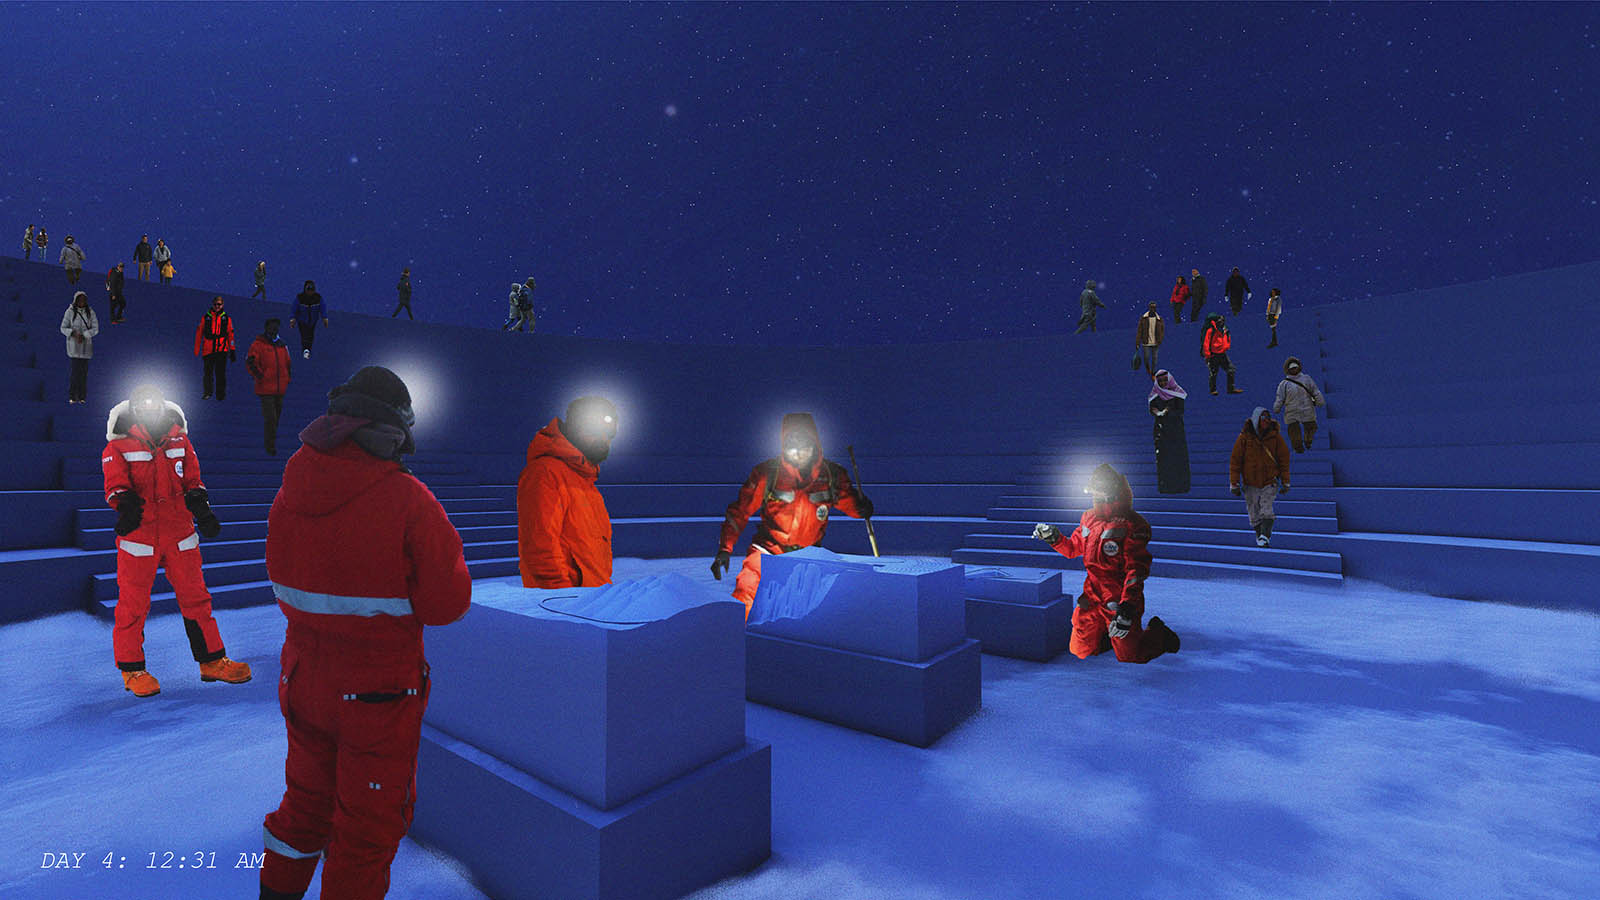 visualization of people in orange jumpsuits with head lamps standing around in icy setting at dusk